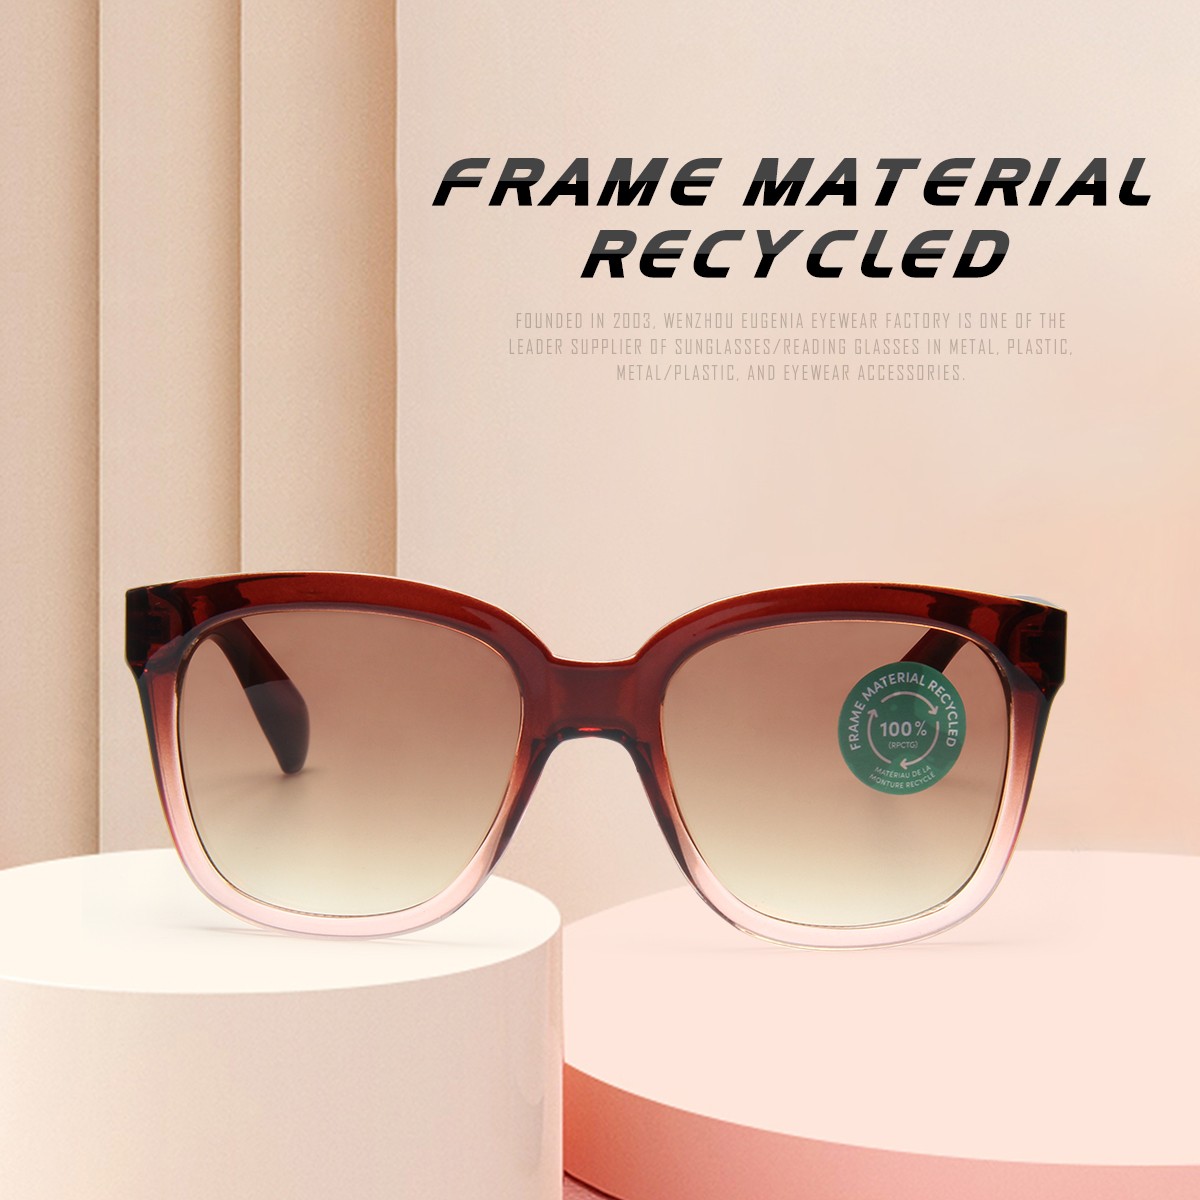 low-cost recycled sunglasses wholesale overseas market-1